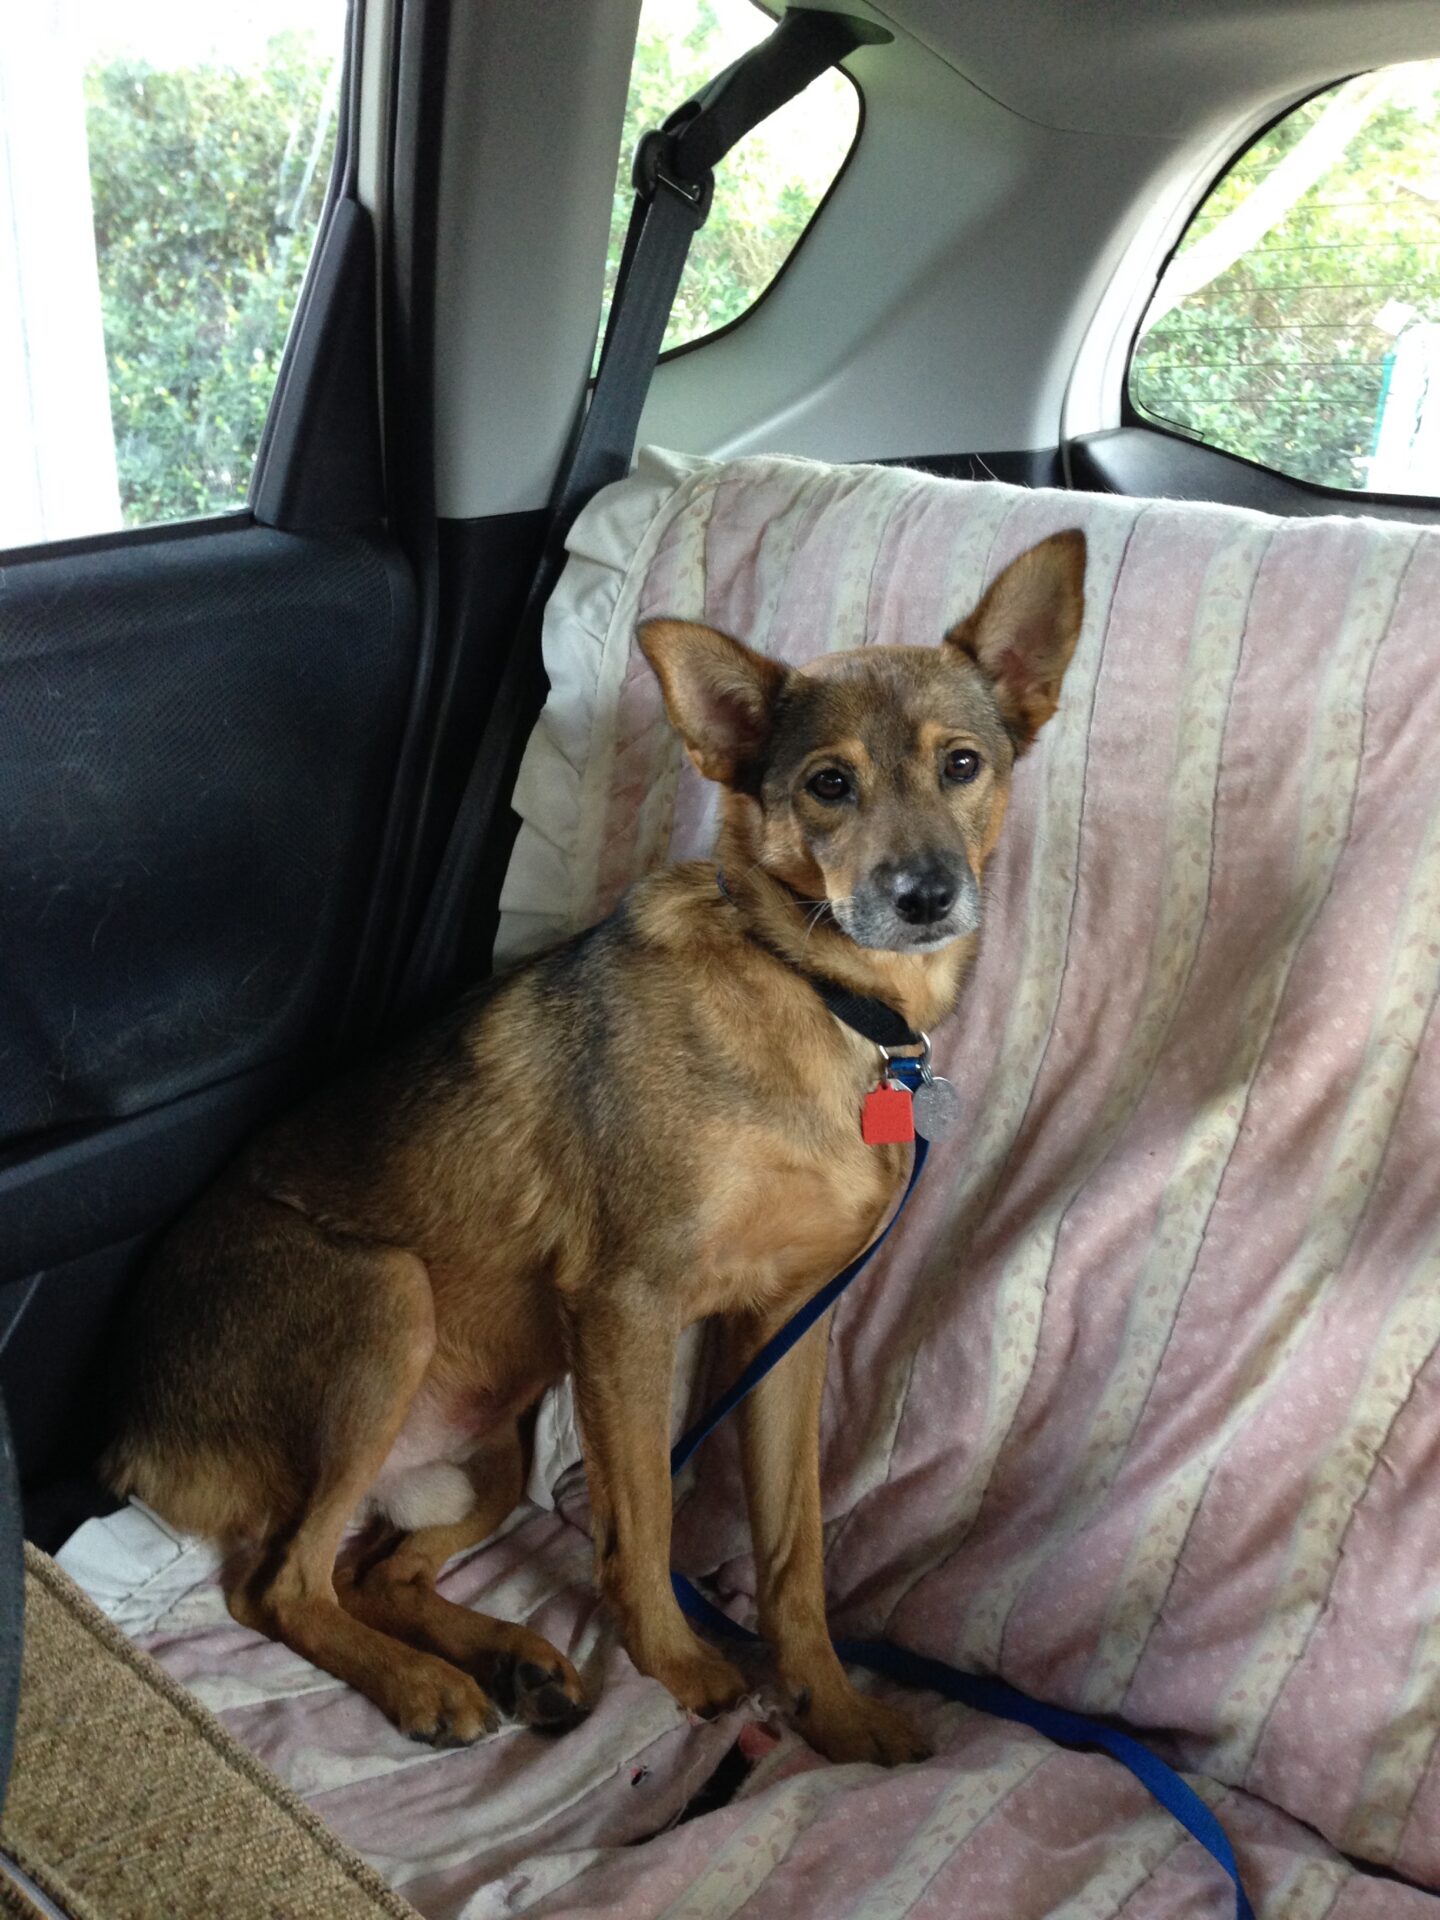 Image of a cute dog sitting on a blanket in the back seat of a car